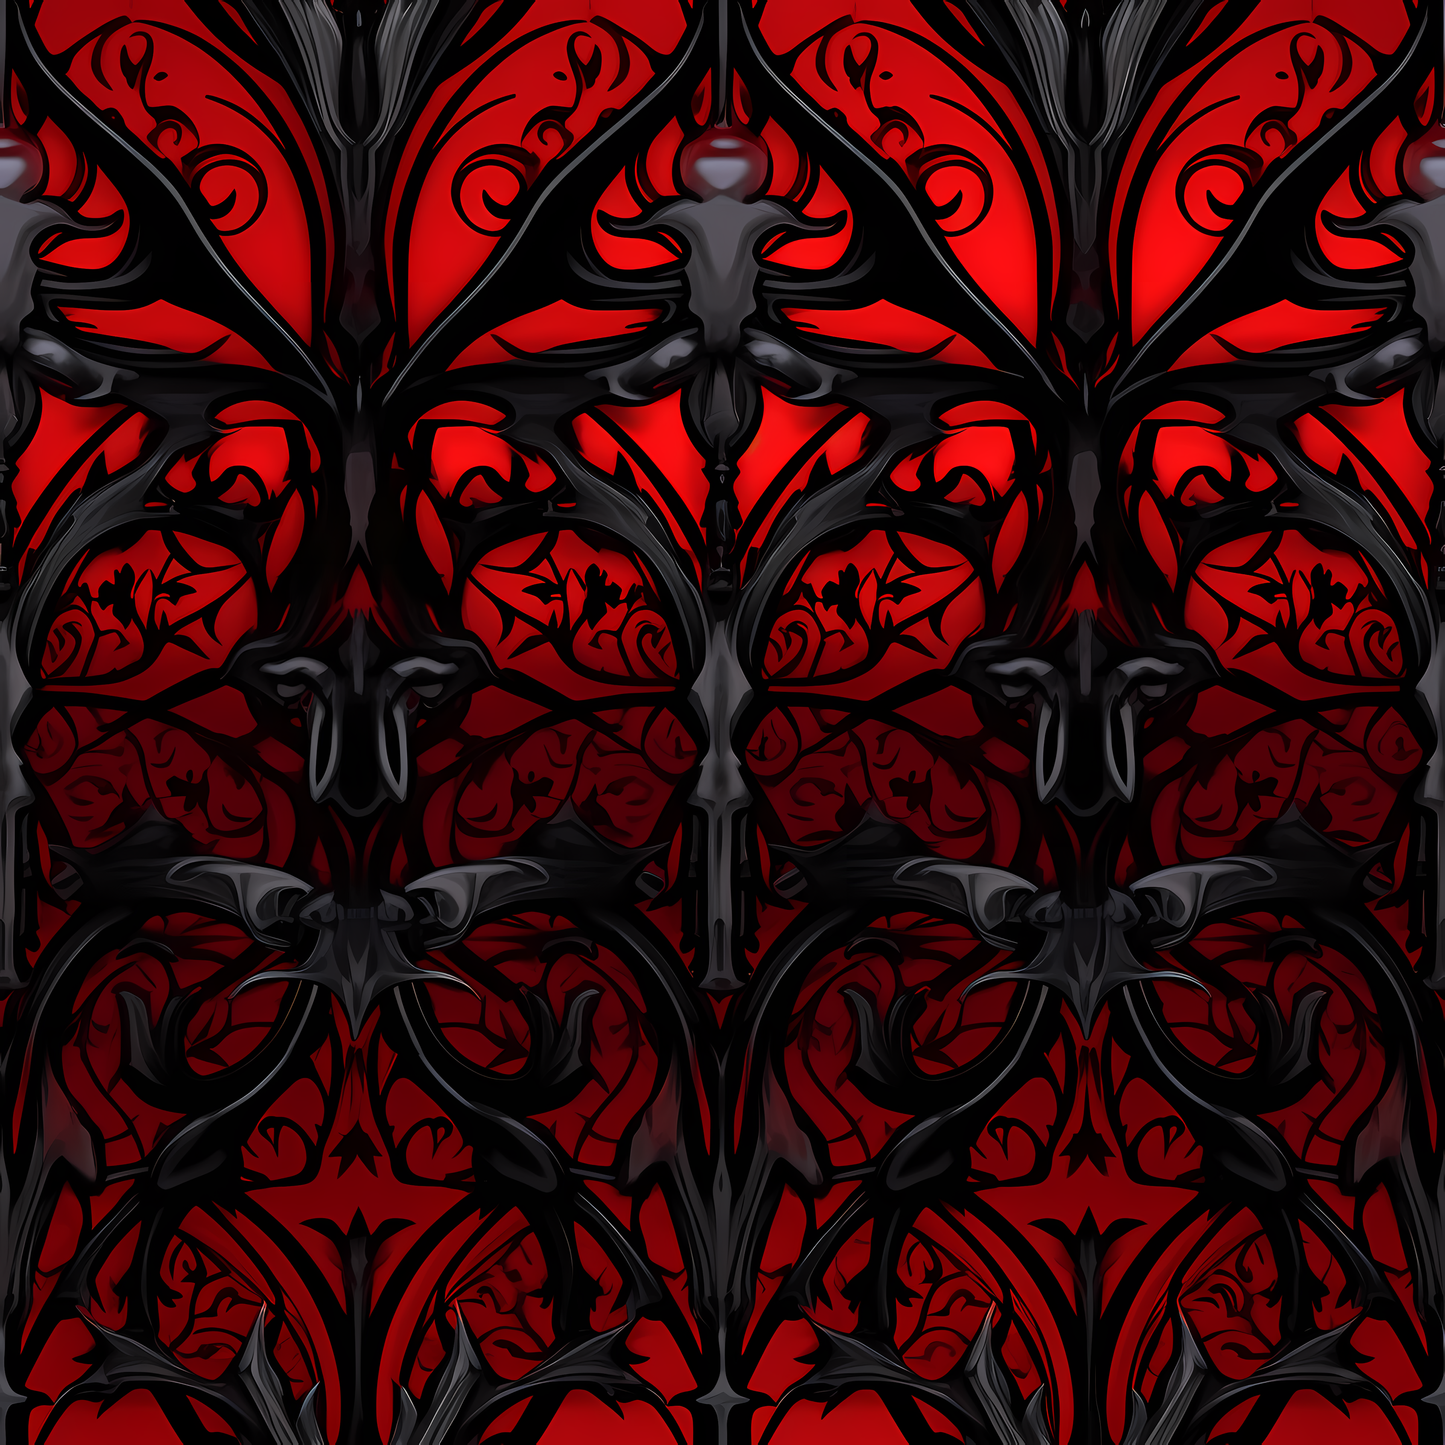 GOTHIC ABSTRACT